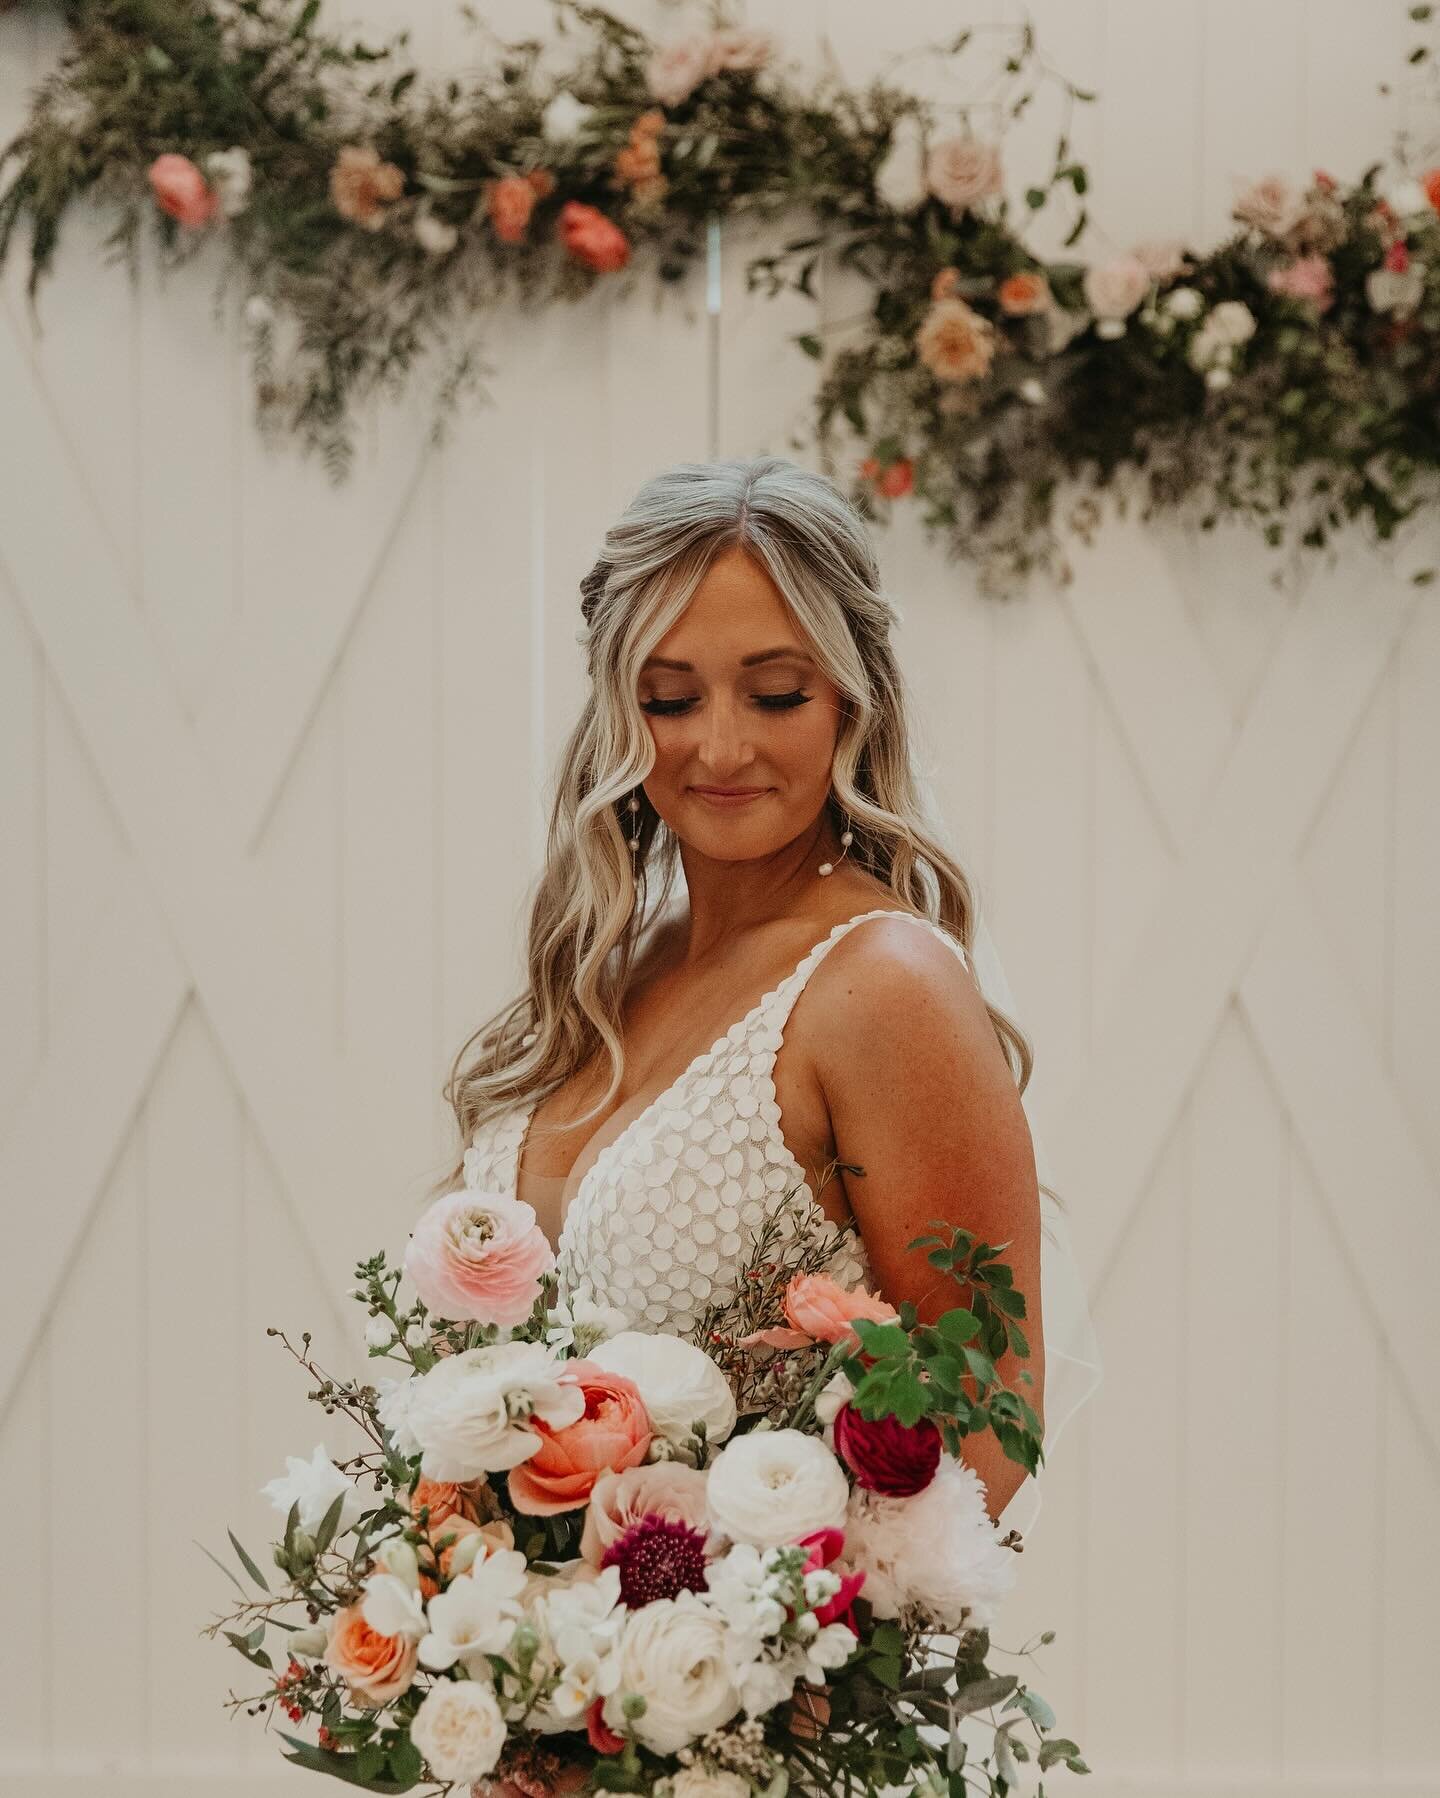 Happy First Day of Spring! 🌸 

AKA #weddingseason 🙌🏼

Comment 💍 below if you&rsquo;re a spring 24 bride! 

Photo: @itsannieryan 
Venus: @the_sixpence 
Floral: @mollyandmyrtle 
Coordination: @thoughtfullydesignedco 

⁣
.⁣
.⁣
.⁣
.⁣
.⁣
#bouquet #bri